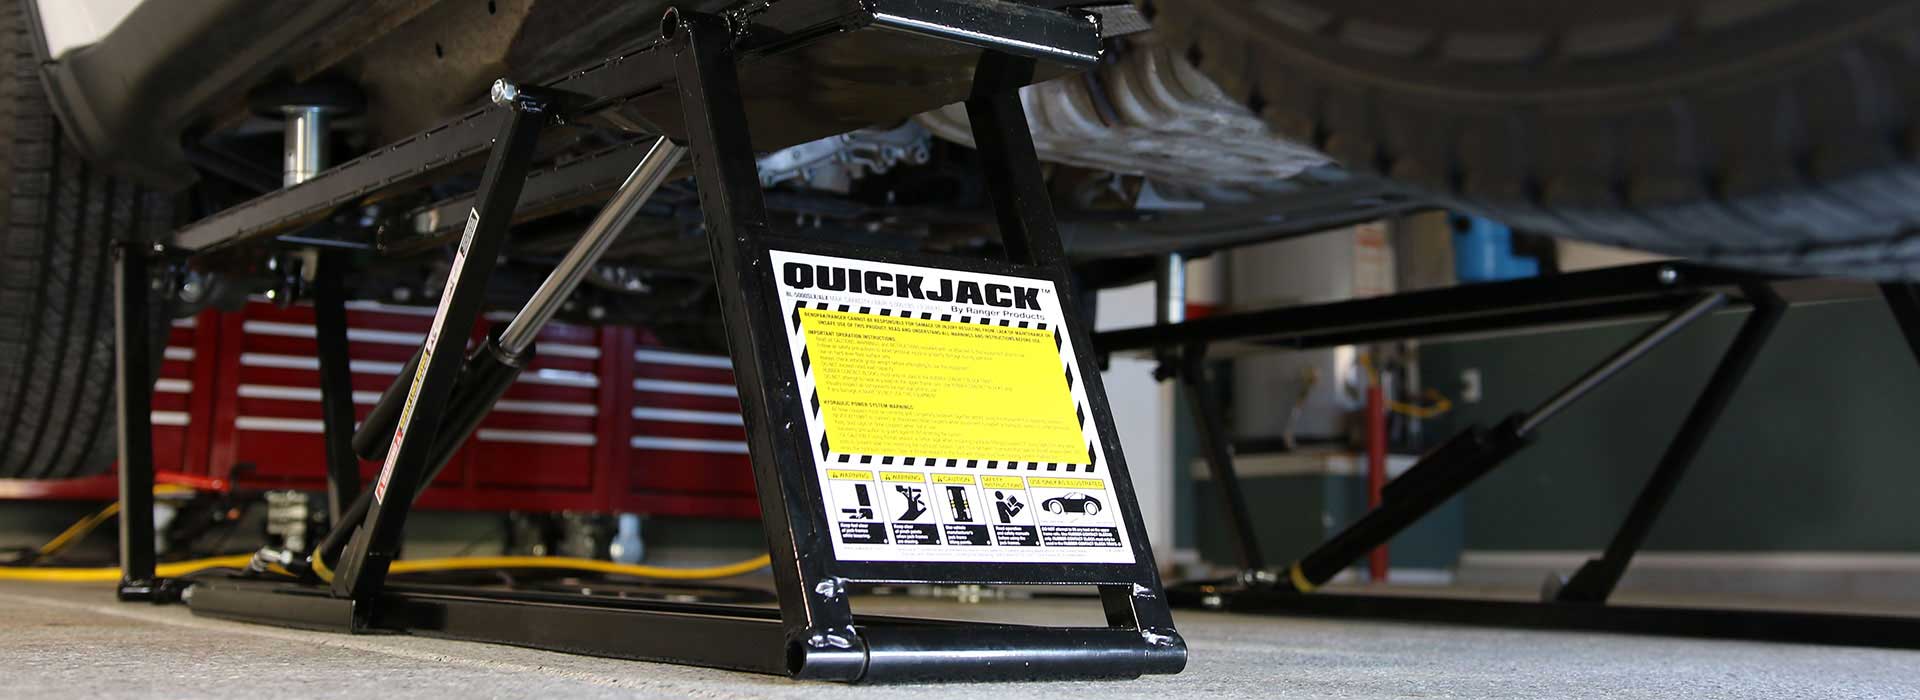 Access higher lifting points with QuickJack